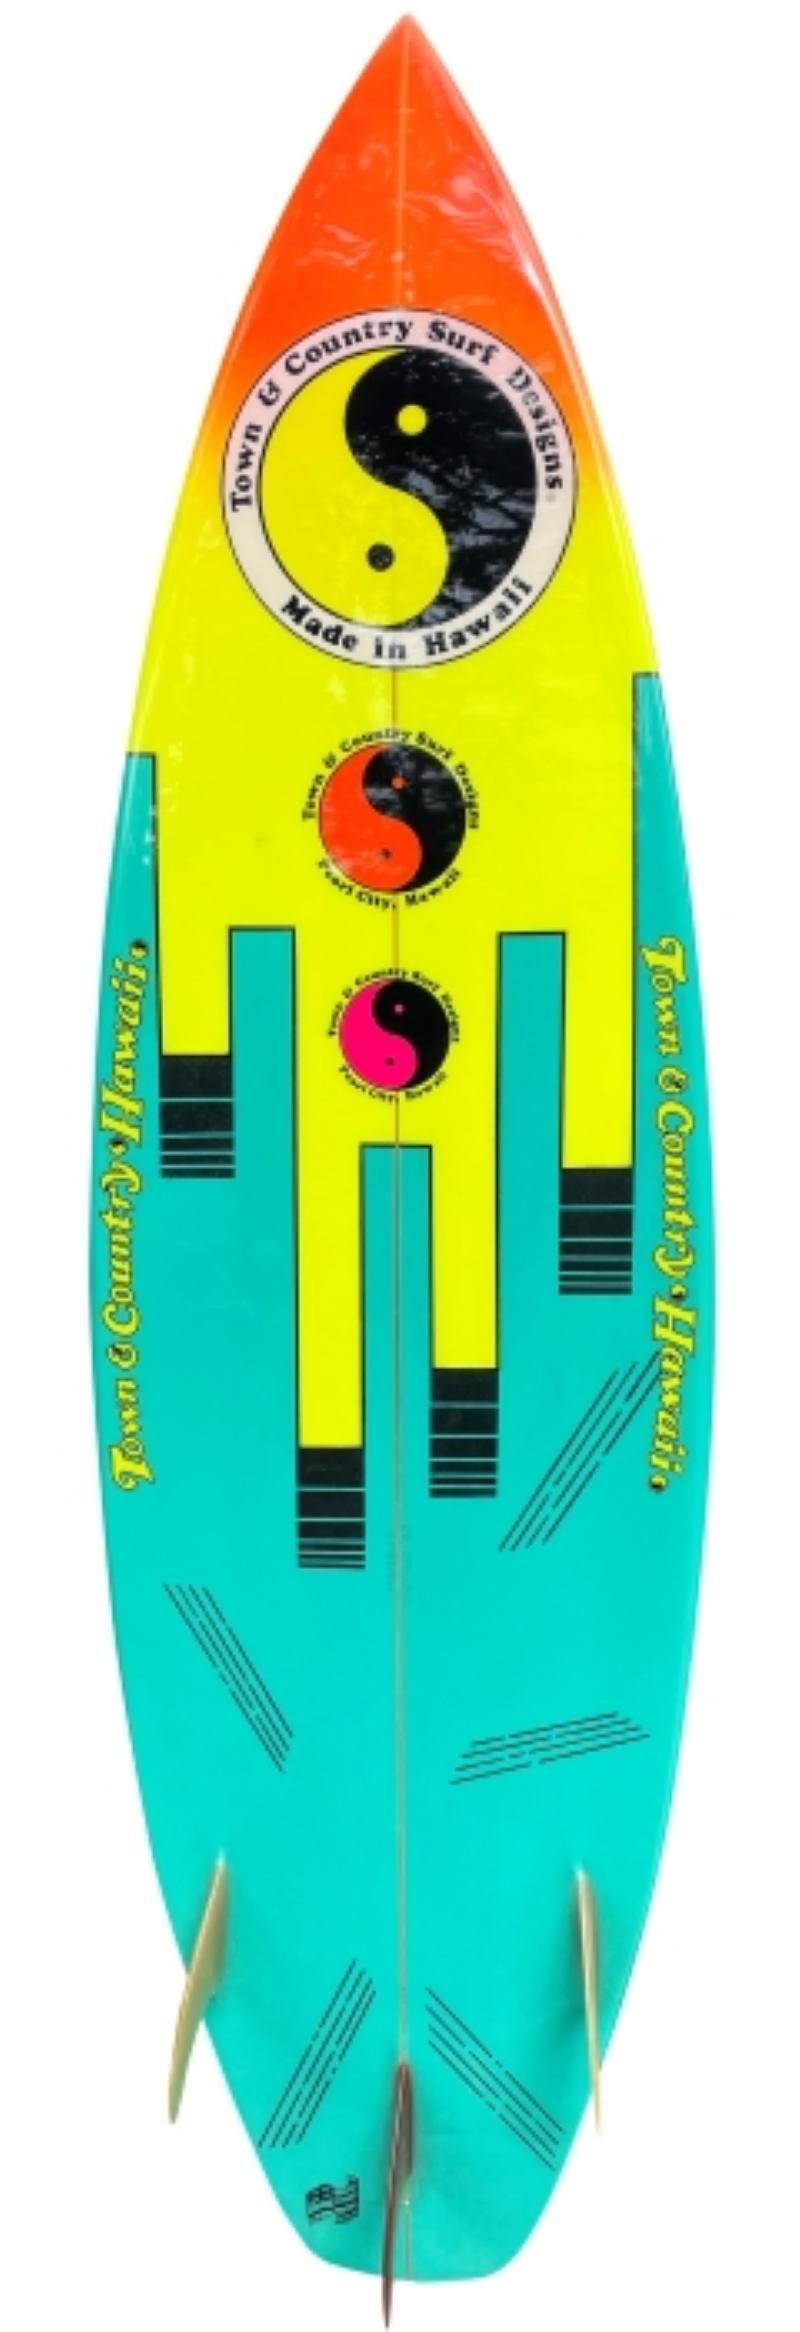 1987 Town & Country (T&C) shortboard shaped by Louis Ferreira. Features an incredible 80’s style airbrush design with glassed on thruster (tri-fin) setup. A fantastic example of a fully restored T&C surfboard with vibrant colors made in the